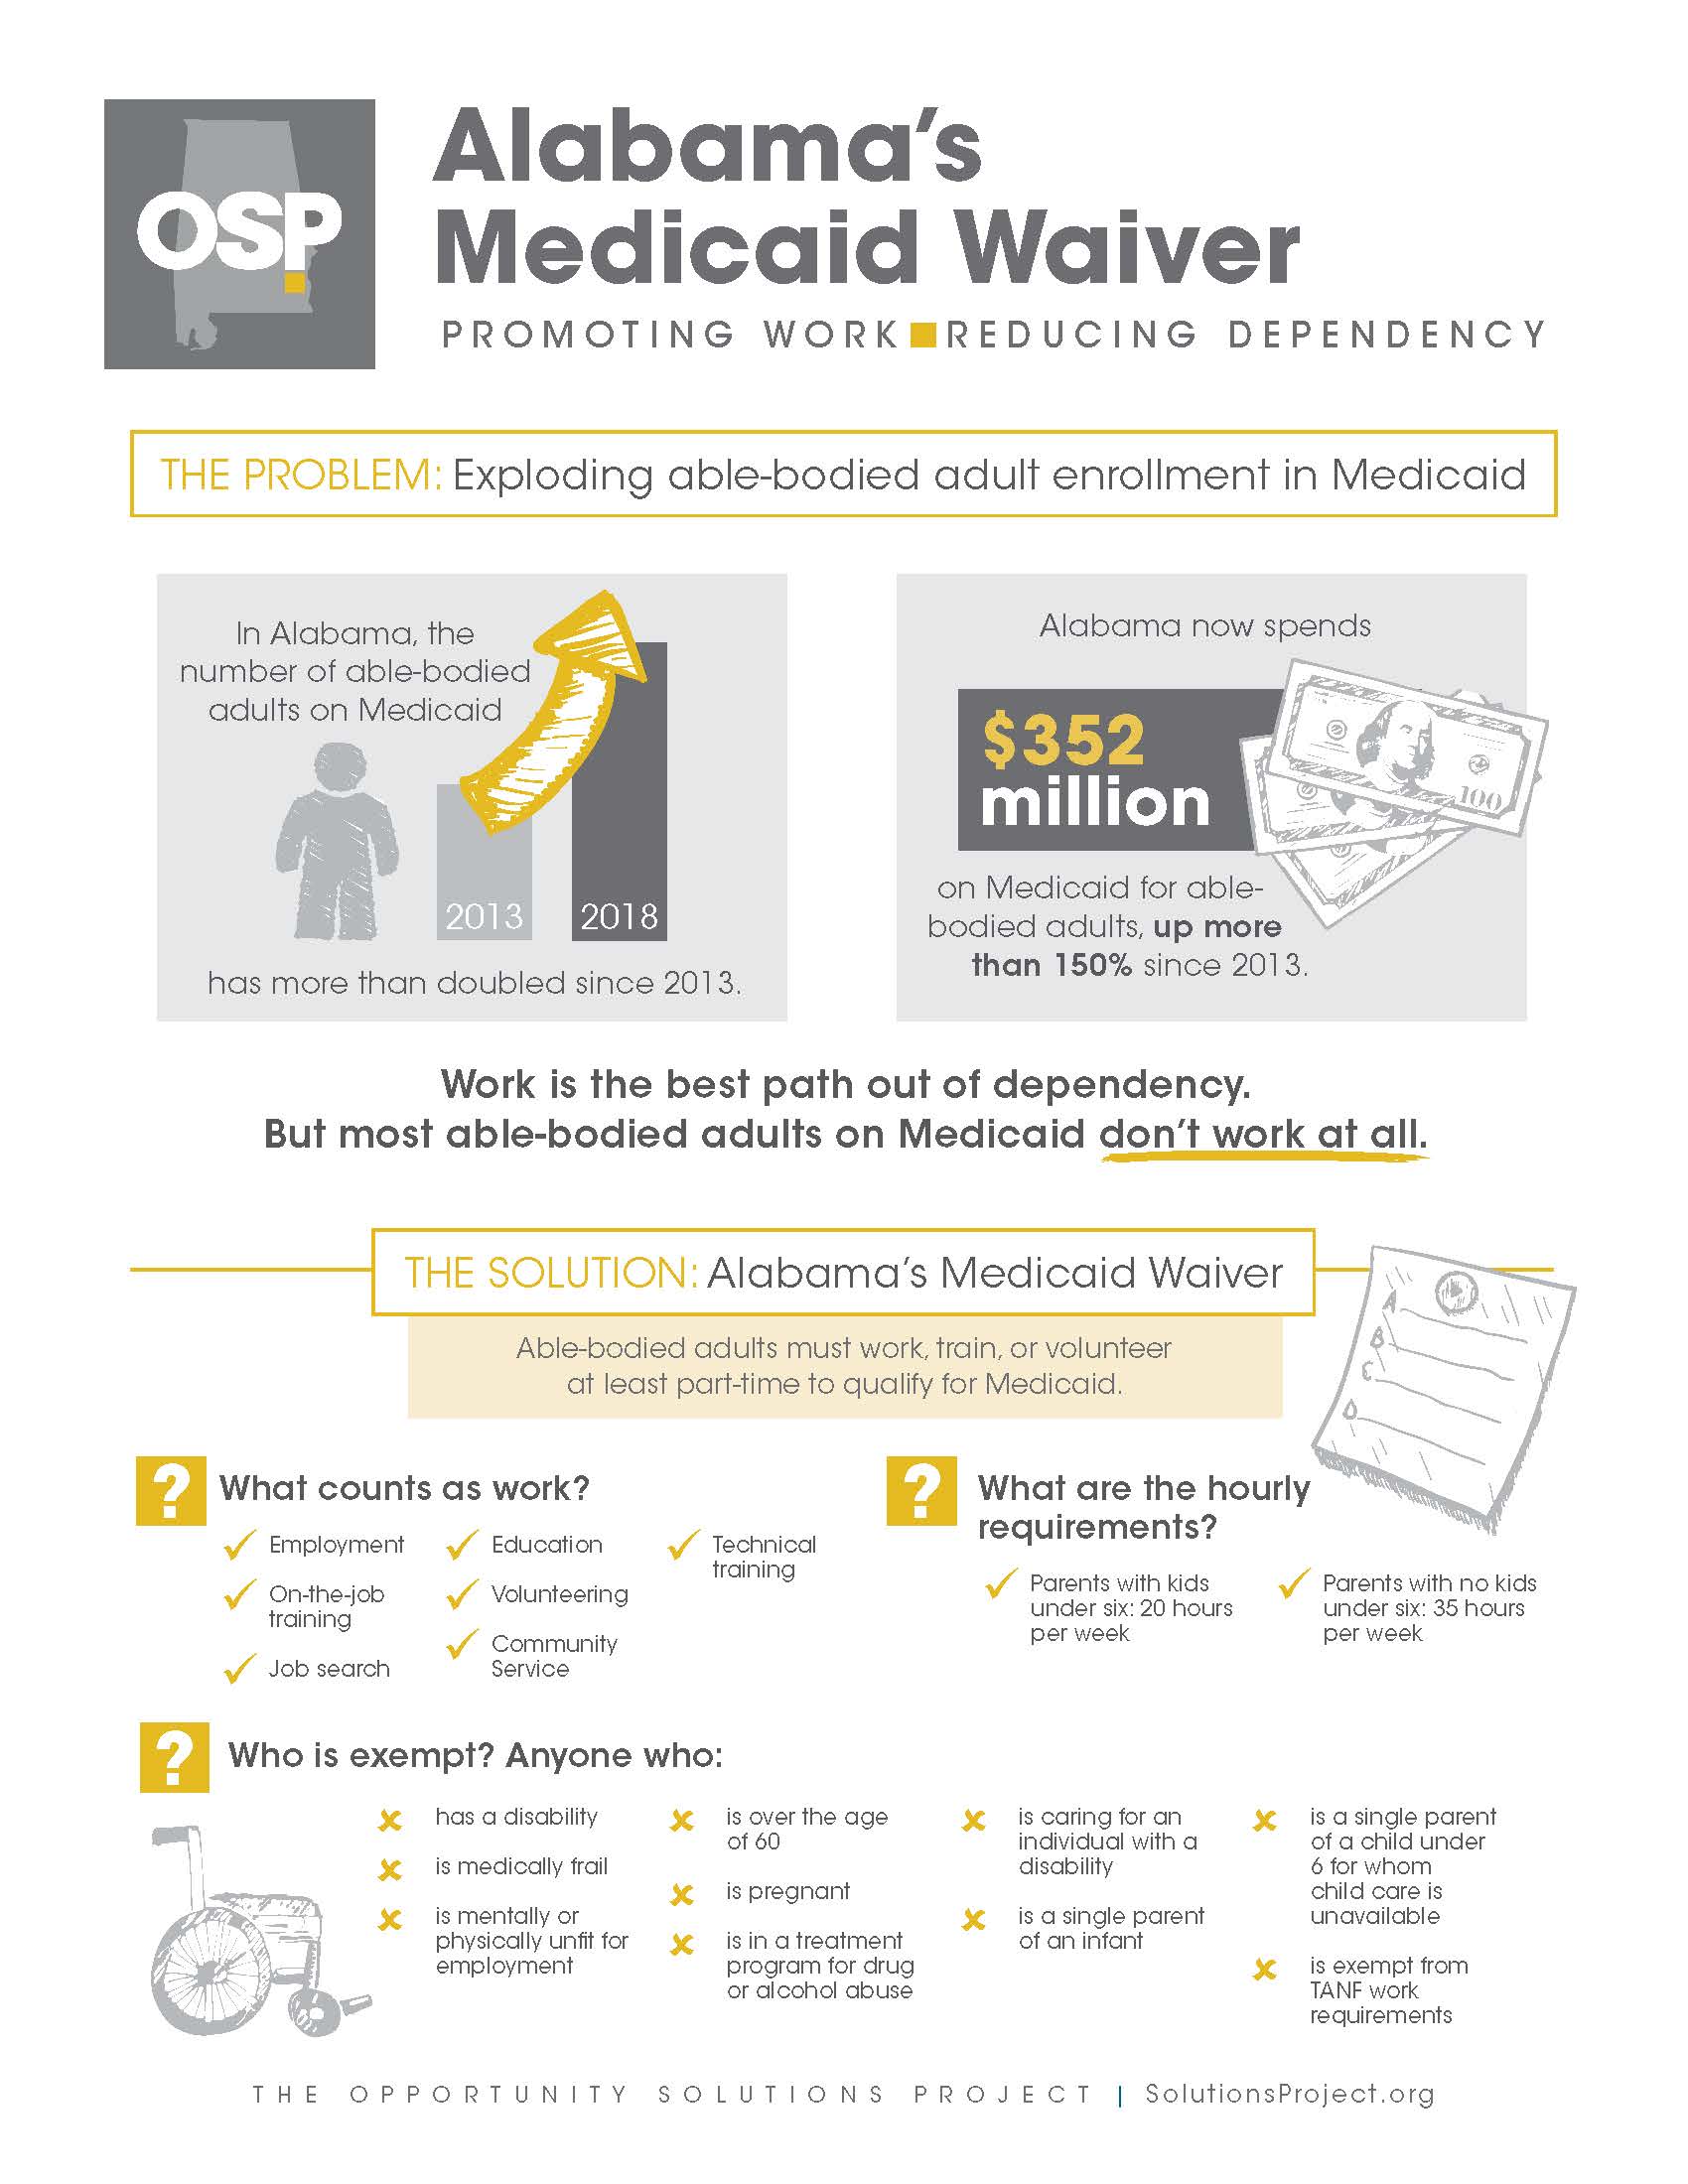 Alabama's Medicaid Waiver | Opportunity Solutions Project